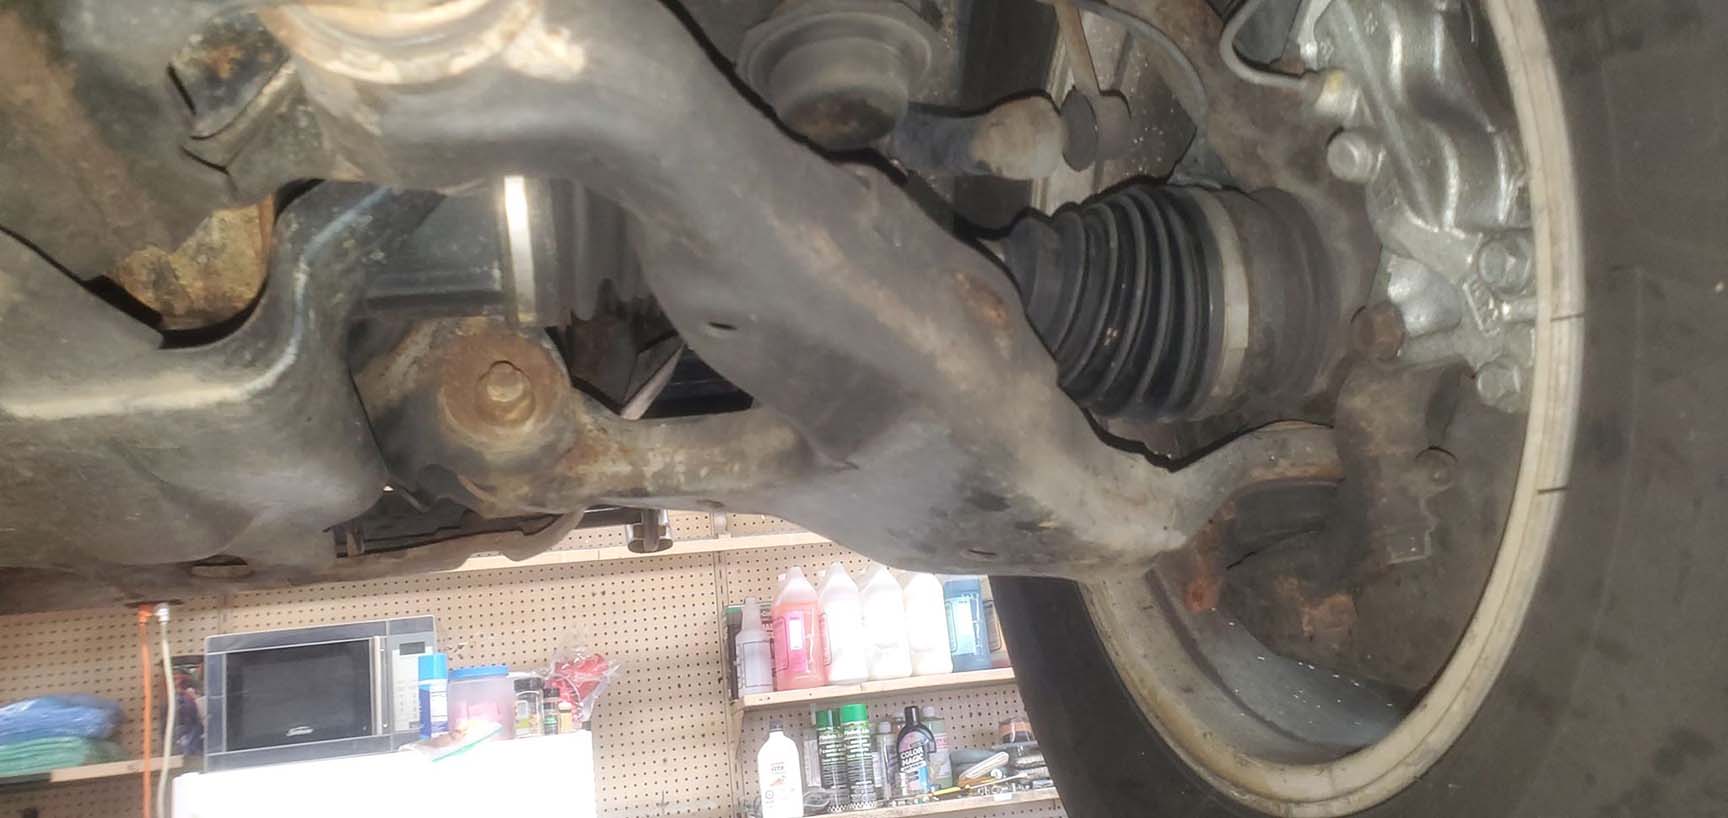 How much is too much rust on a 2006 4Runner?-83310460_639653593445977_3971386762021830656_n-smaller-jpg